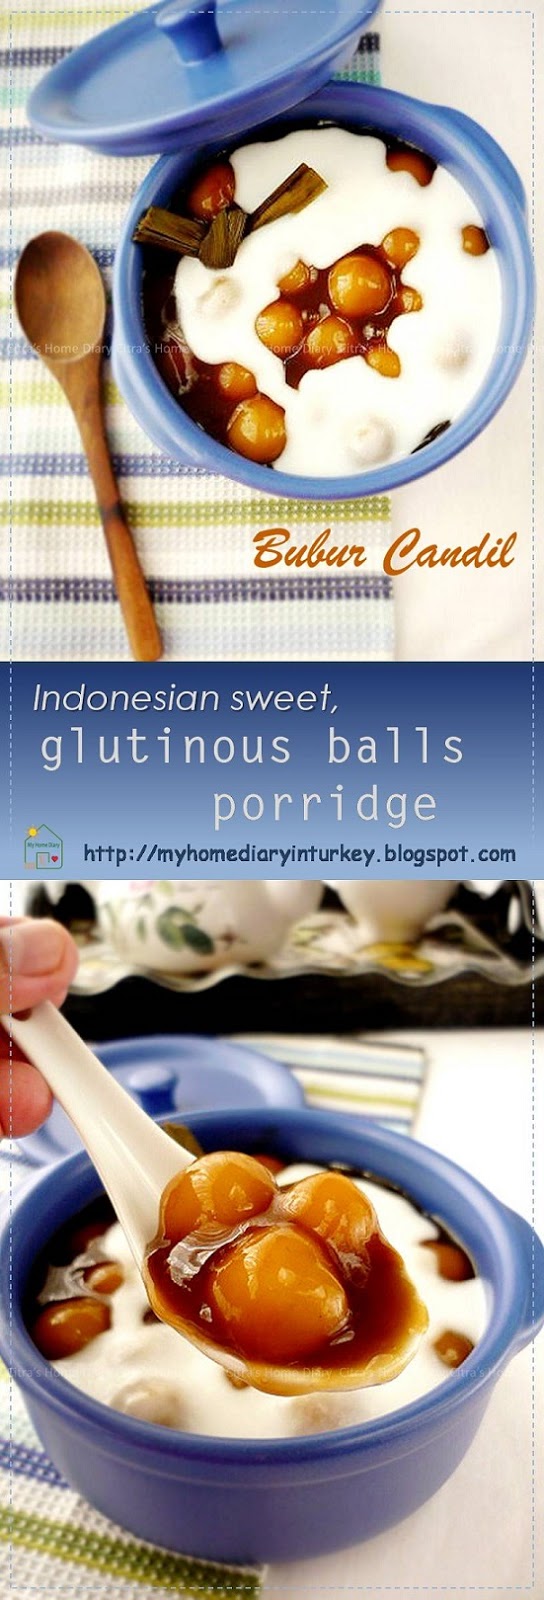 Citra's Home Diary: Resep Bubur Candil / Indonesian 